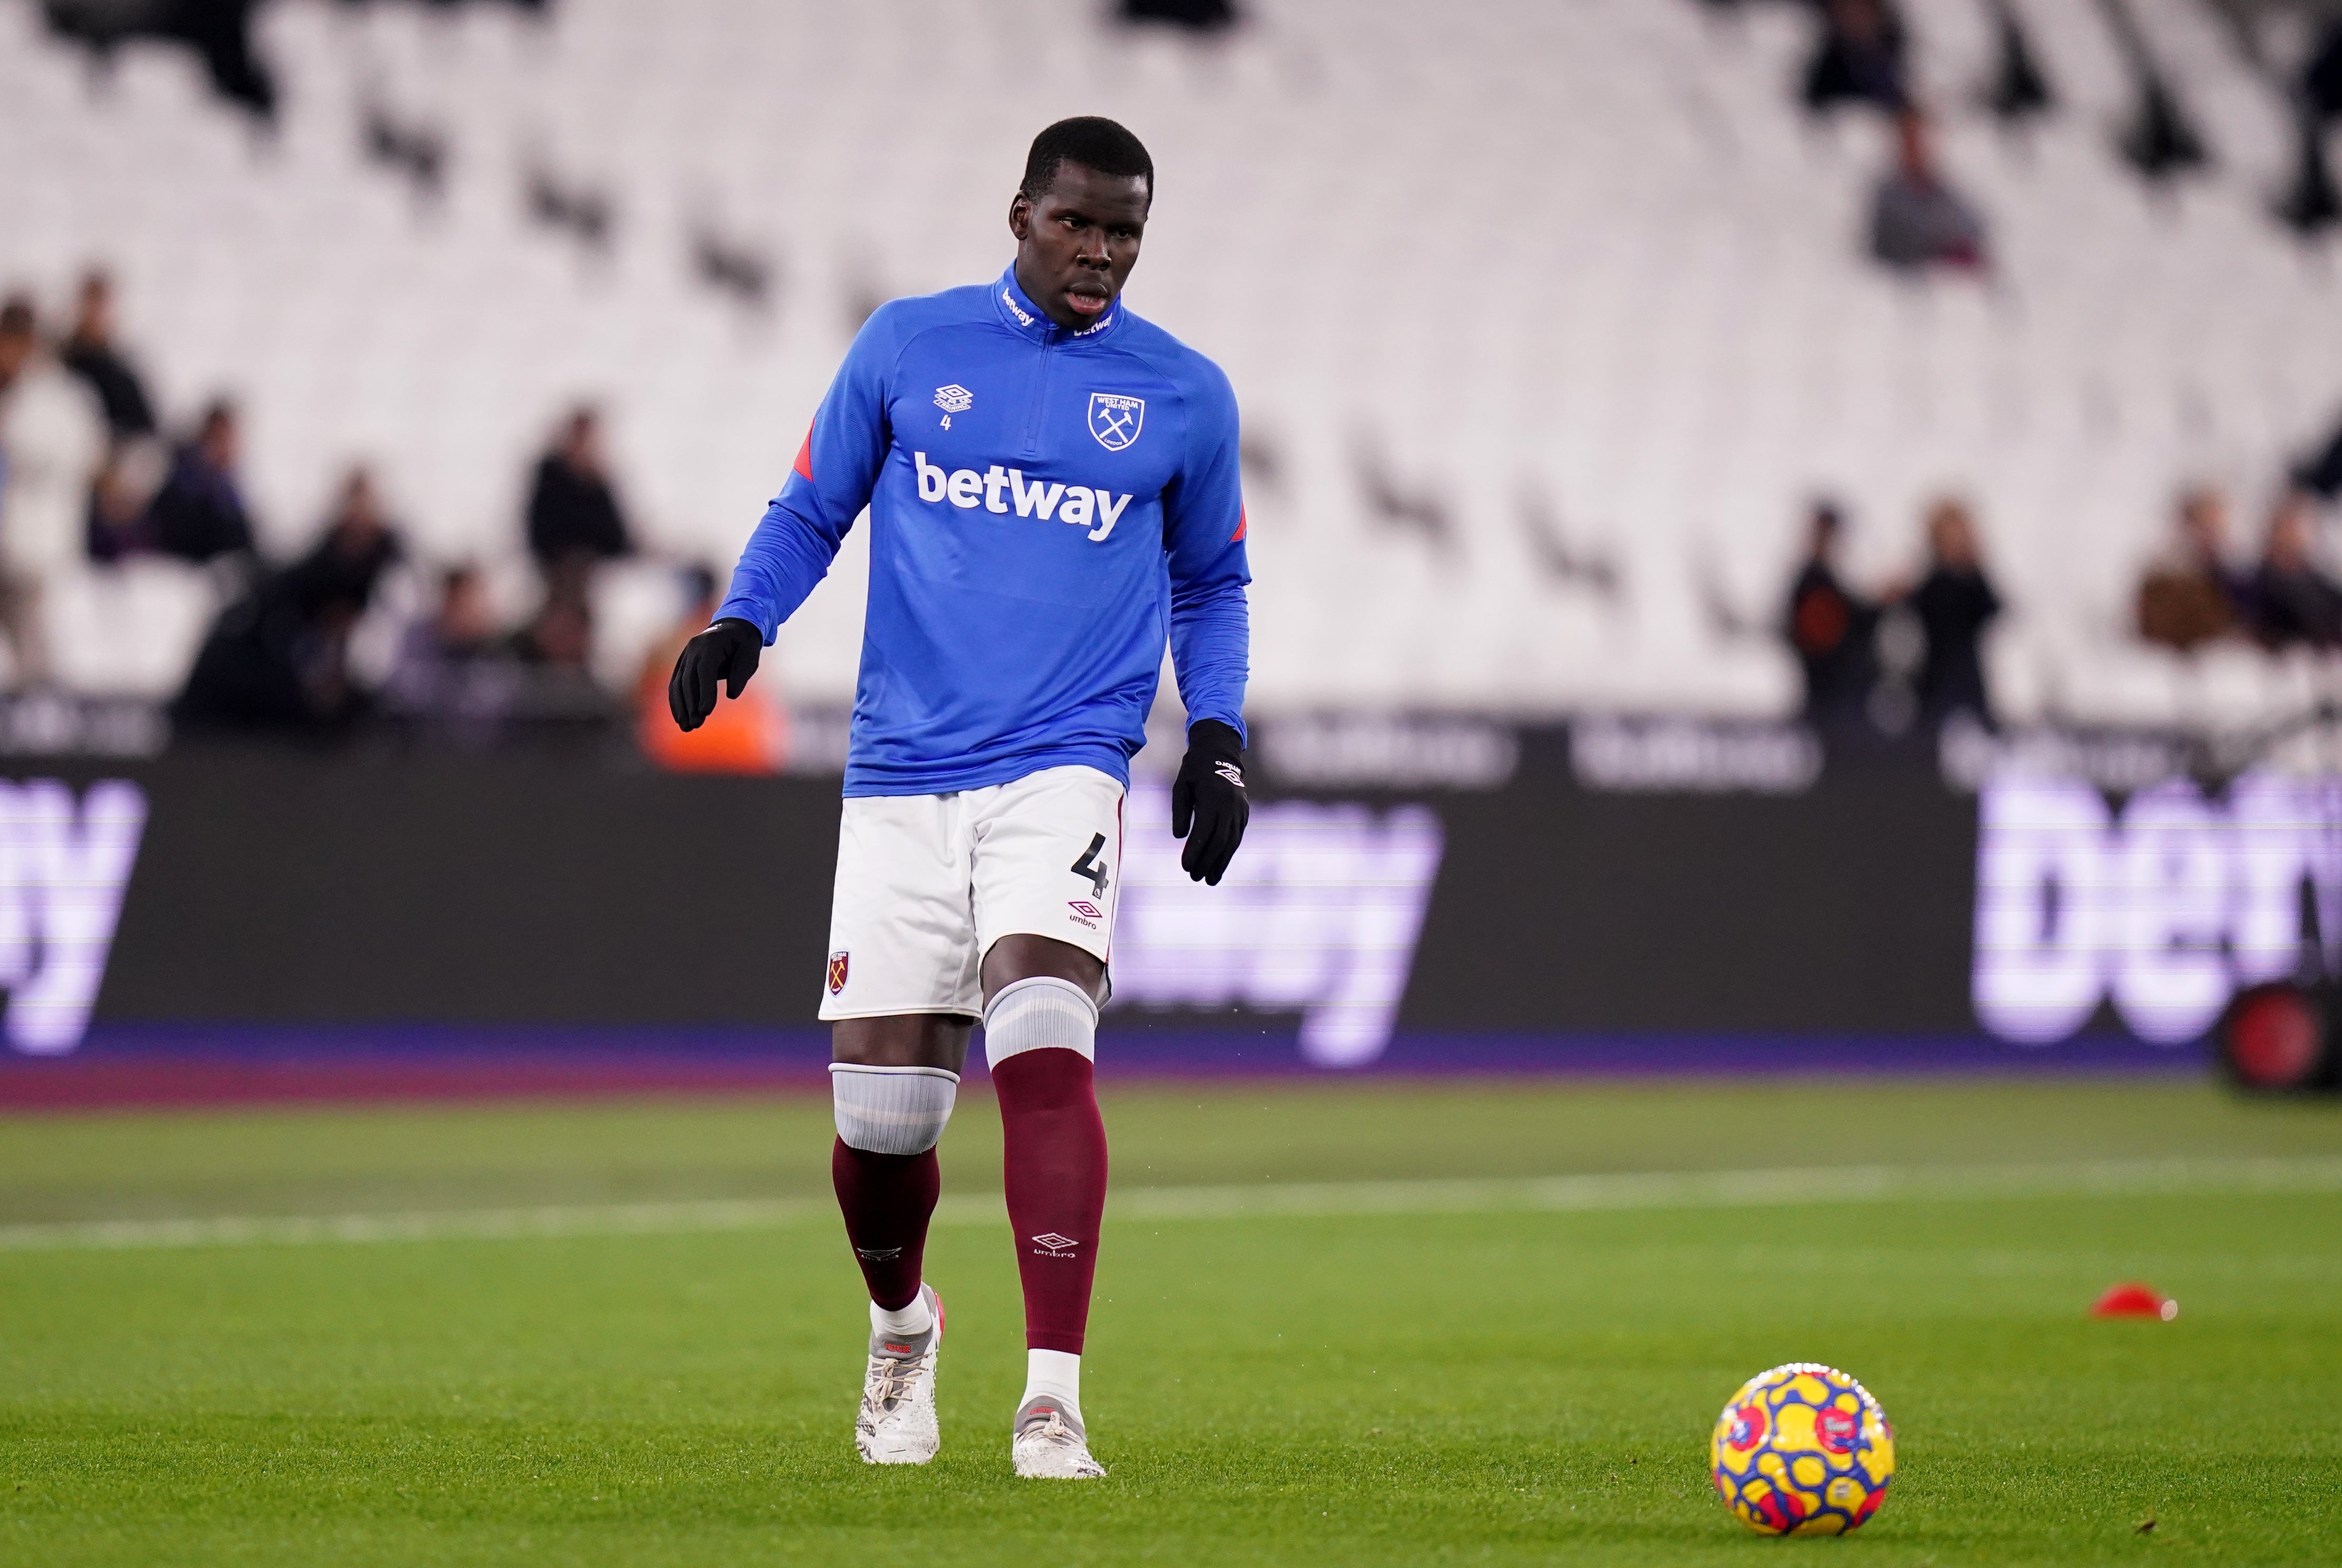 West Ham United’s Kurt Zouma was put on the pitch in Tuesday’s game against Watford despite outcry (PA/ Adam Davy)